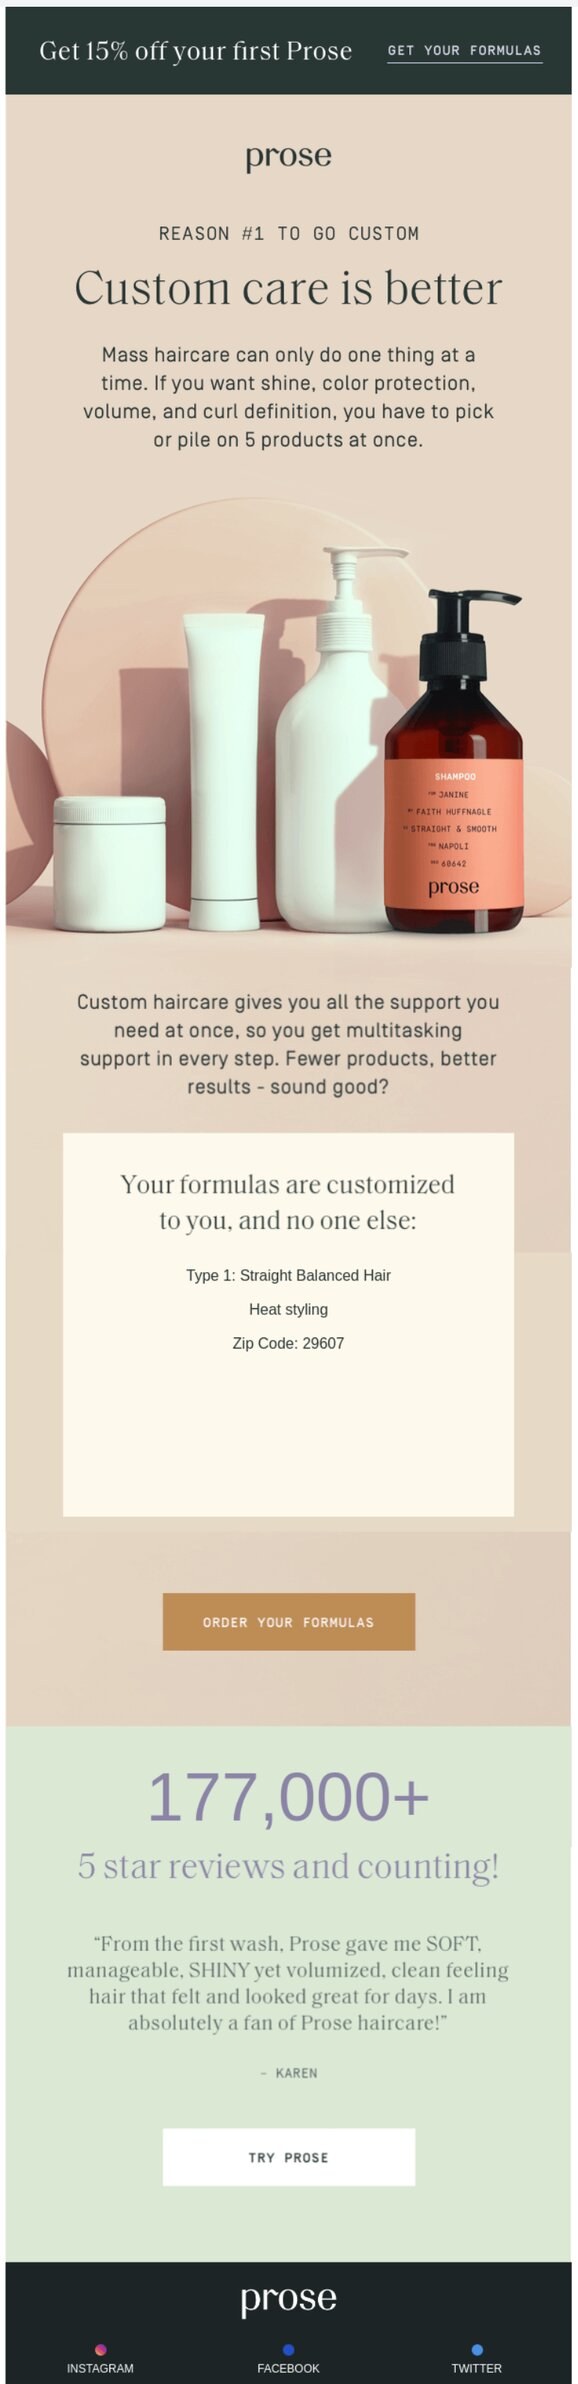 Free haircare sample promotions